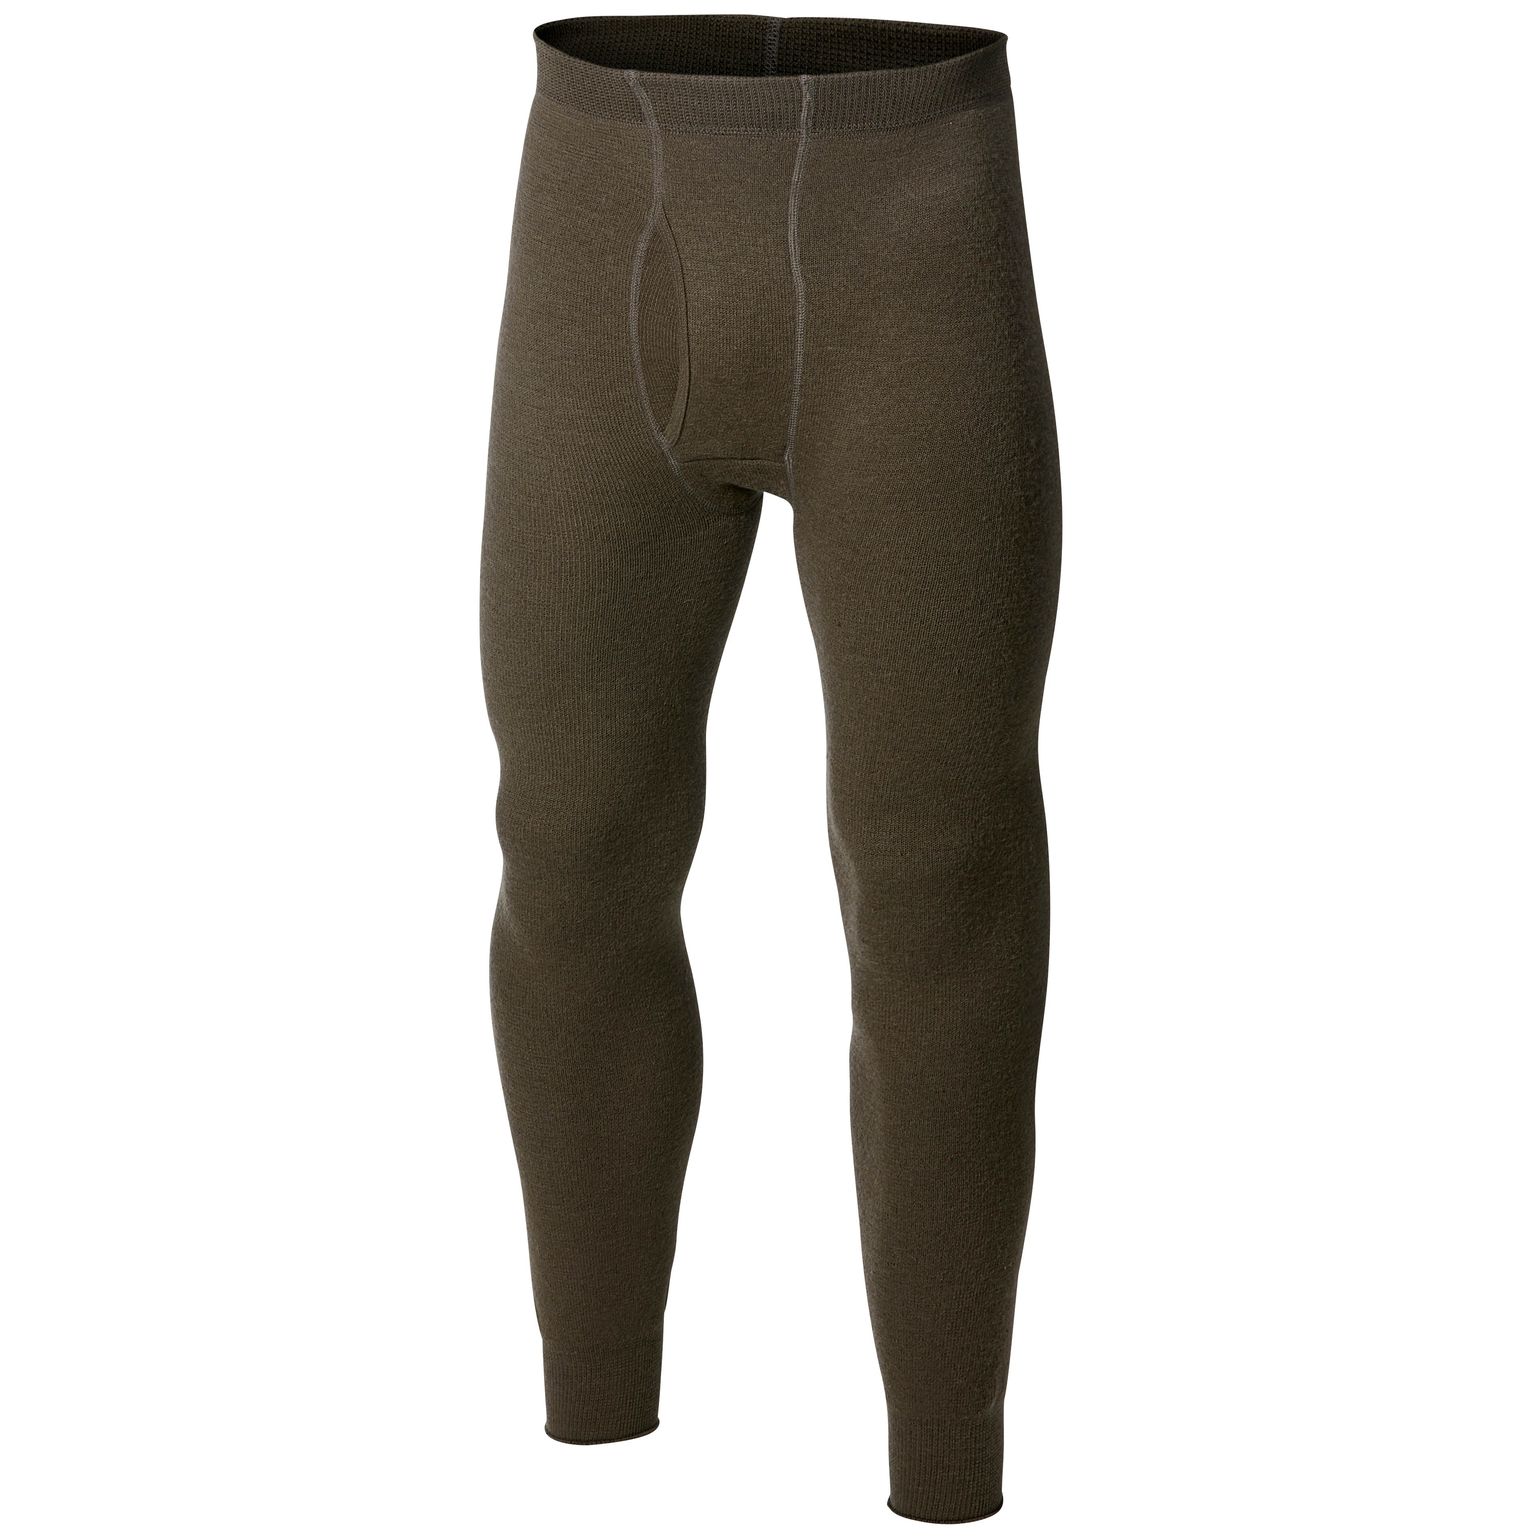 Long Johns with Fly 400 Pine Green